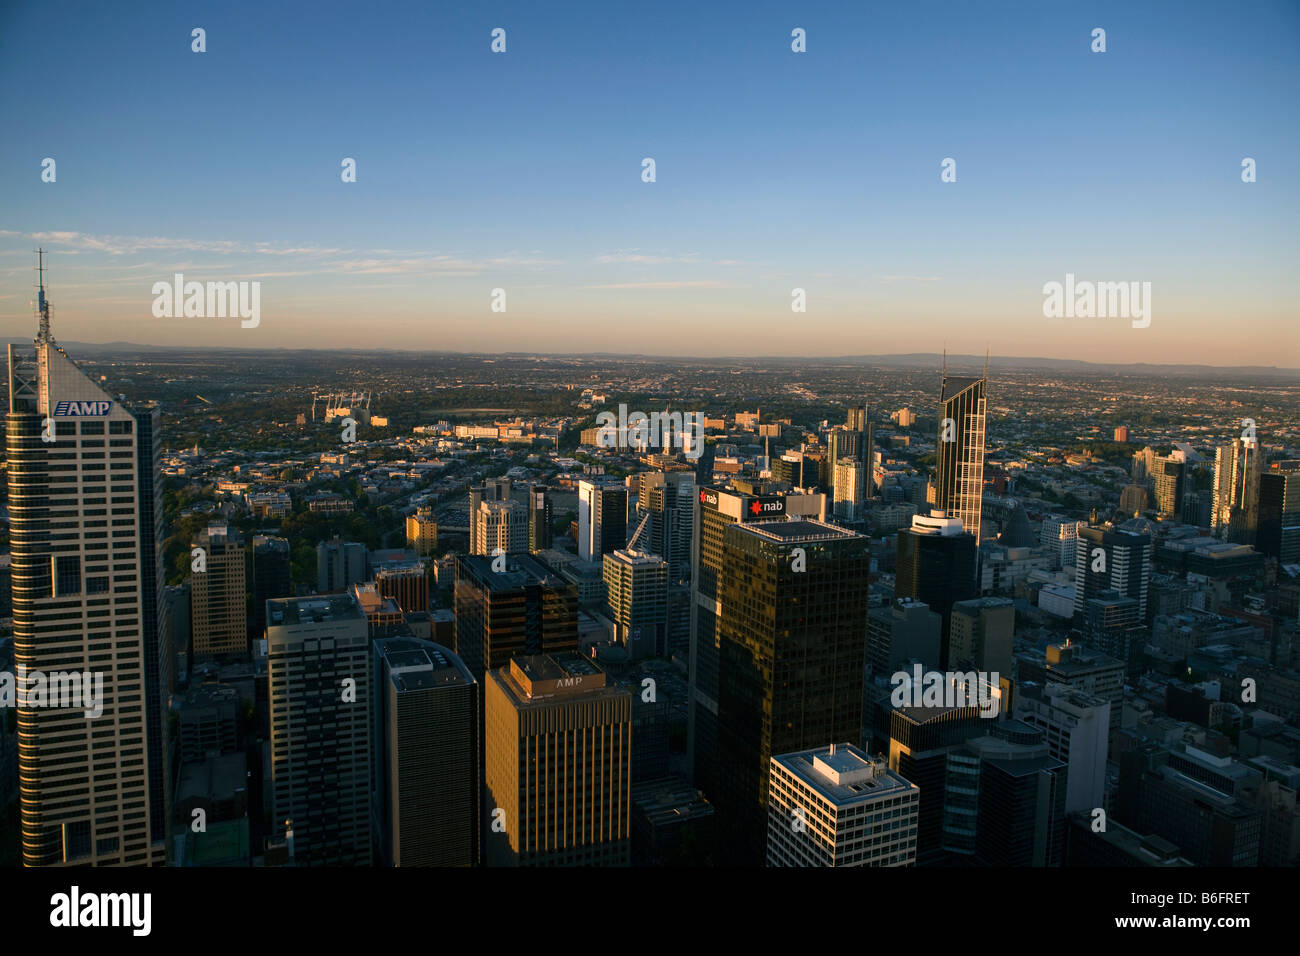 Aerial view of Melbourne, Victoria, Australia city skyline and buildings at sunset Stock Photo